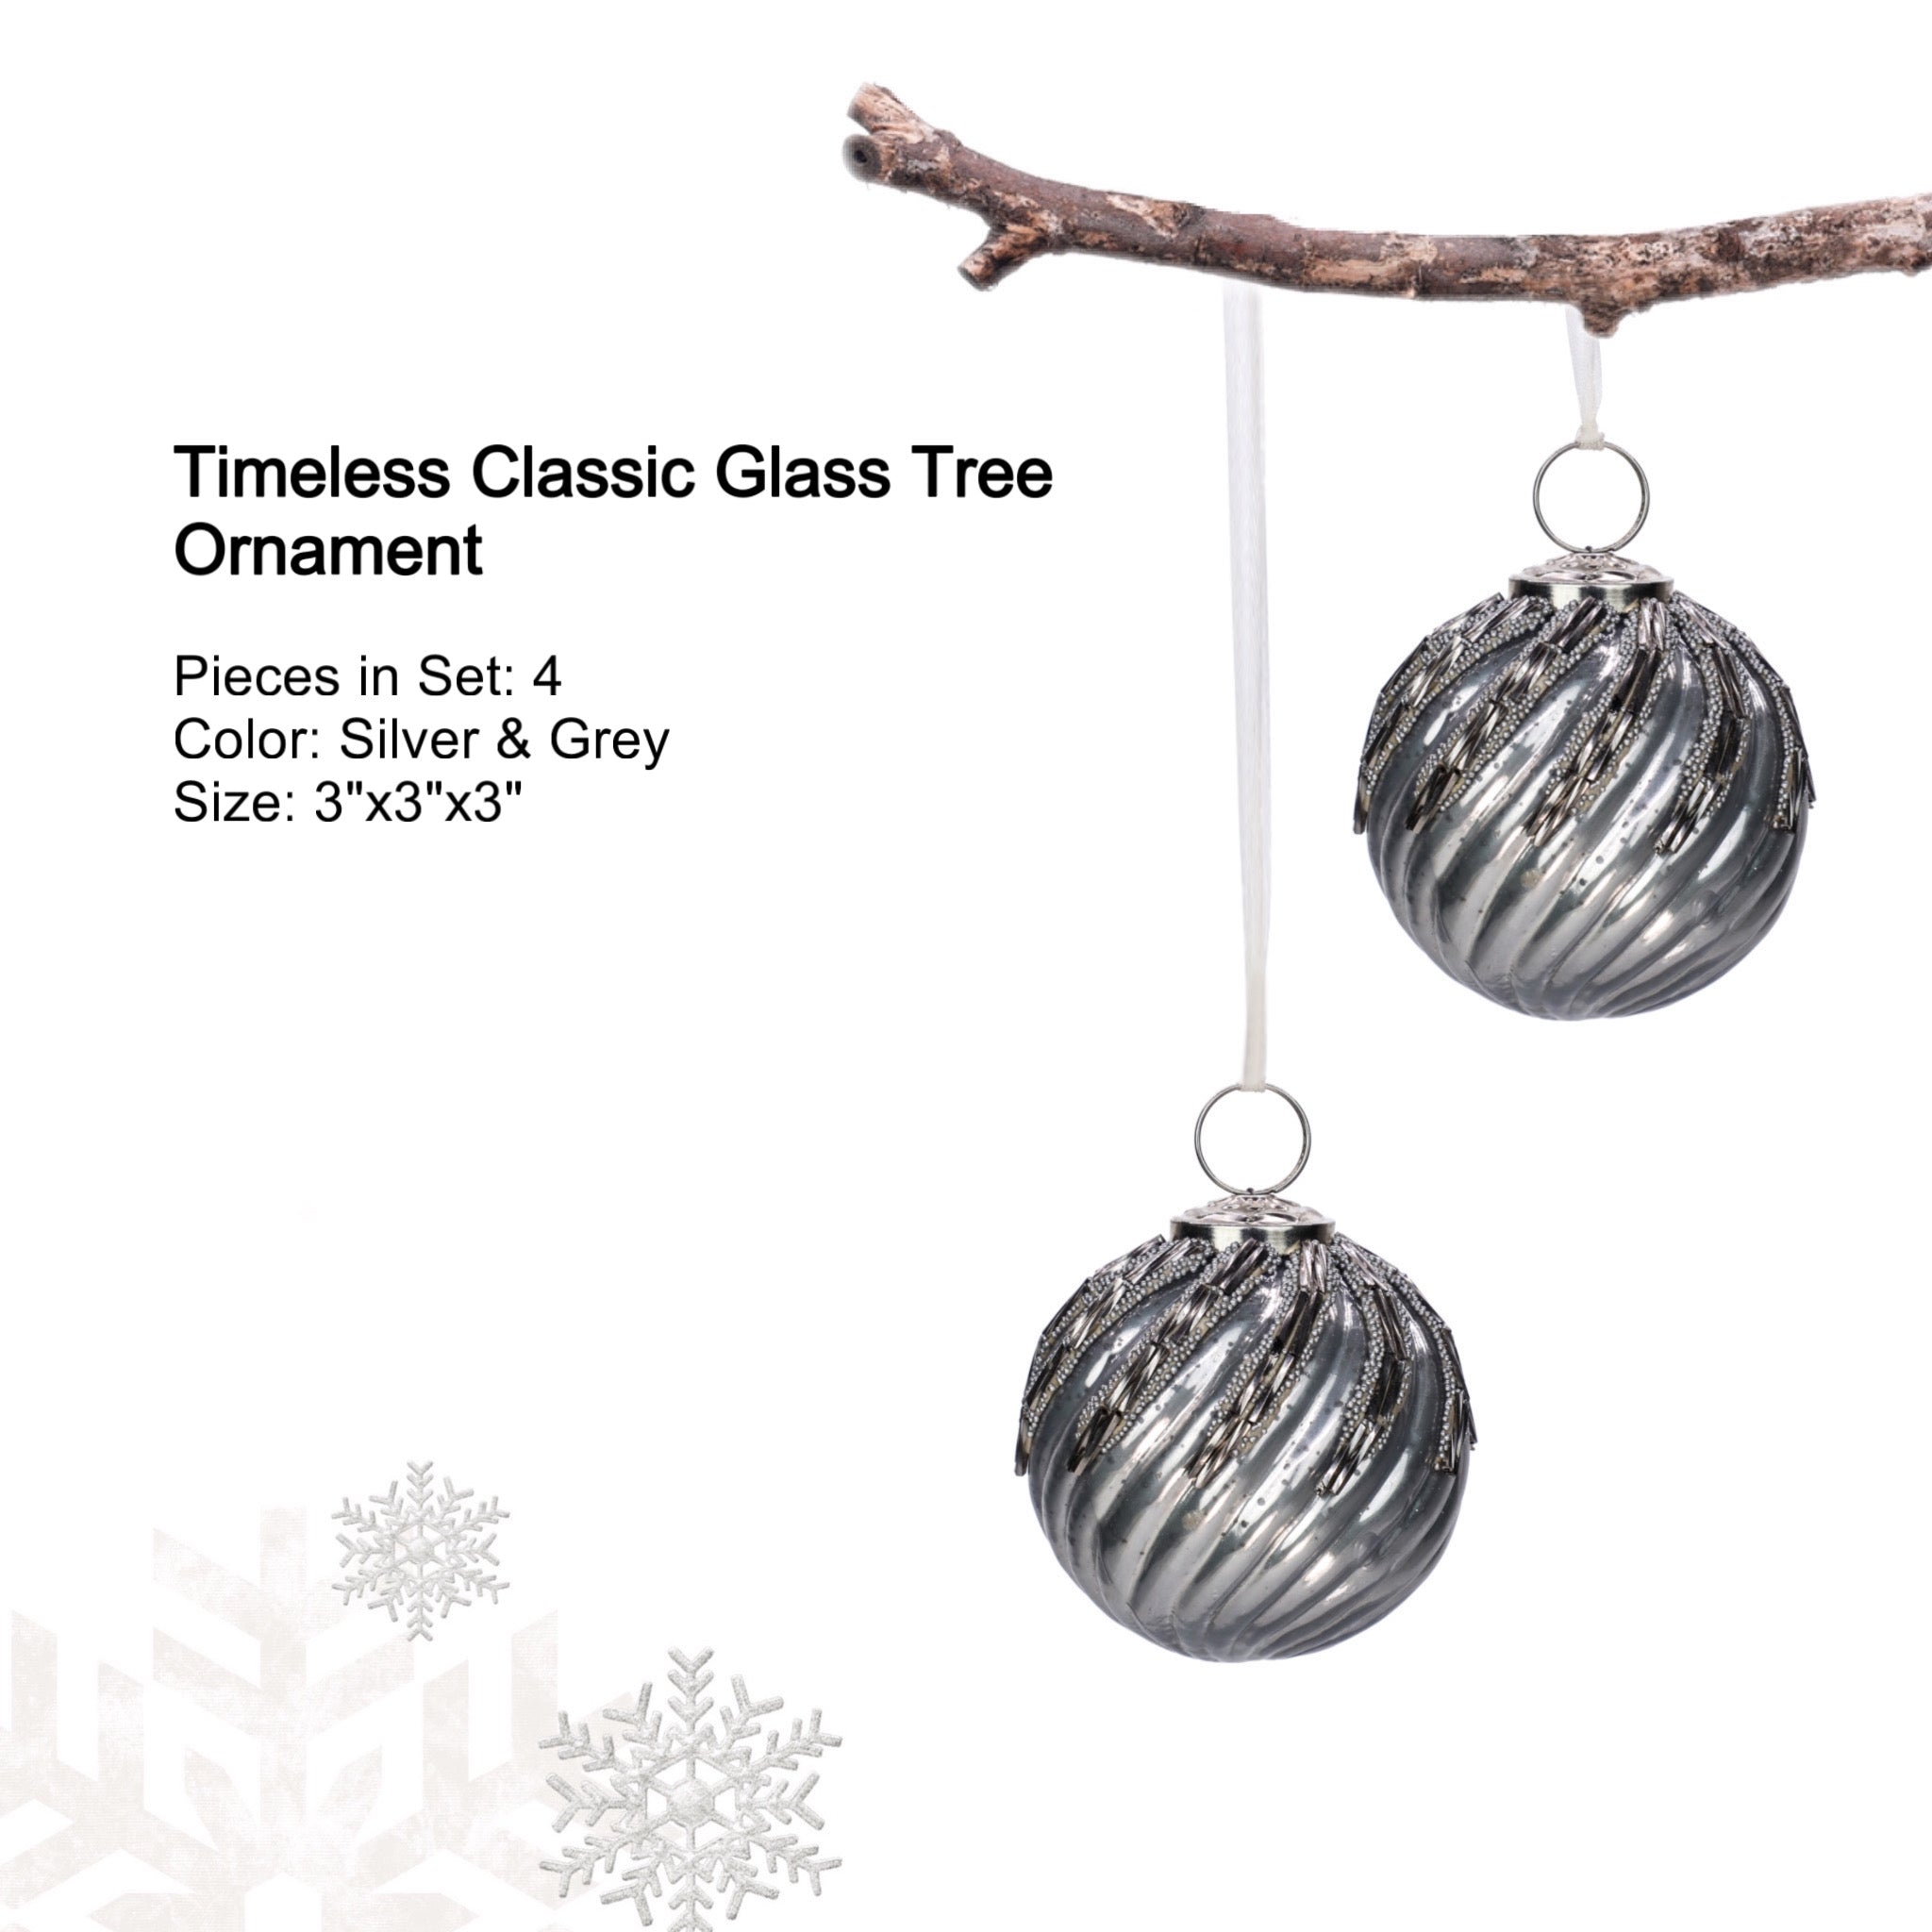 Timeless Classic Glass Tree Ornament in Silver & Grey, Boxed Set of 4